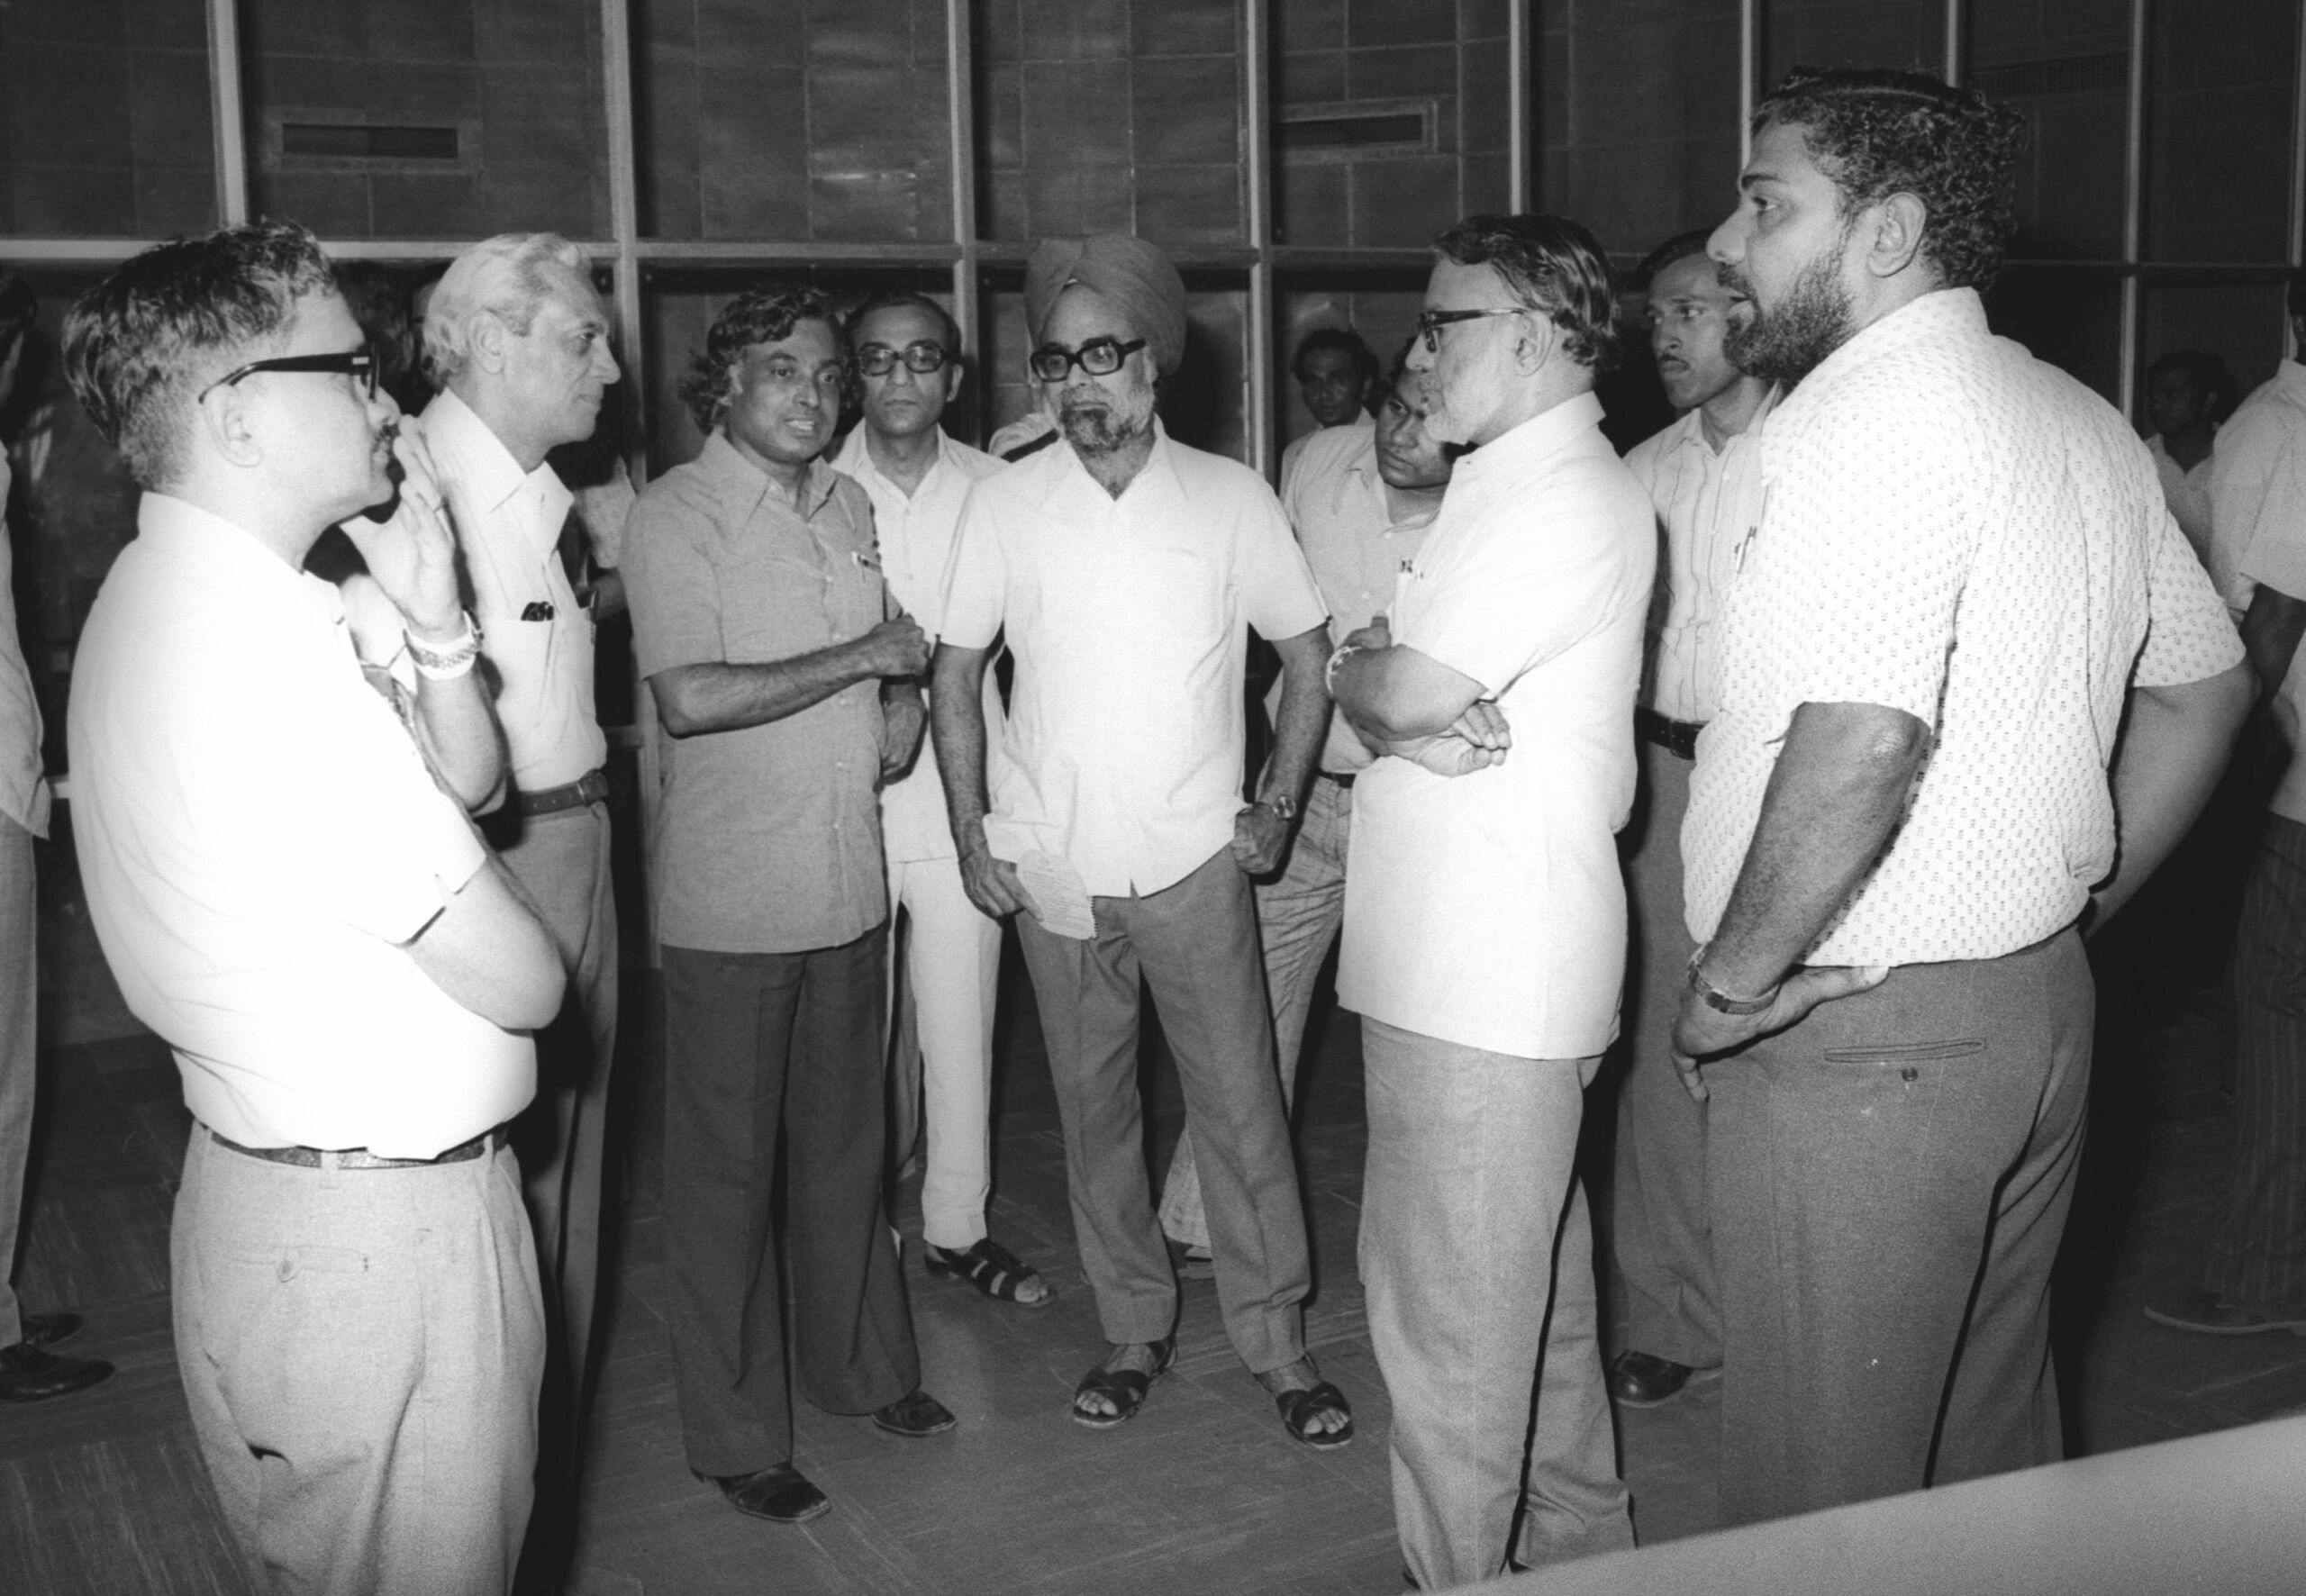 APJ Abdul Kalam briefing the Space Commission members in SHAR (8 August 1978). From left: Col N Pant, Satish Dhawan, Kalam, (not identified), Manmohan Singh, (partially seen, not identified), MGK Menon, K Narayana and R Jayamani. It is interesting to note that later, Kalam became the President of India and Manmohan Singh, the Prime Minister 